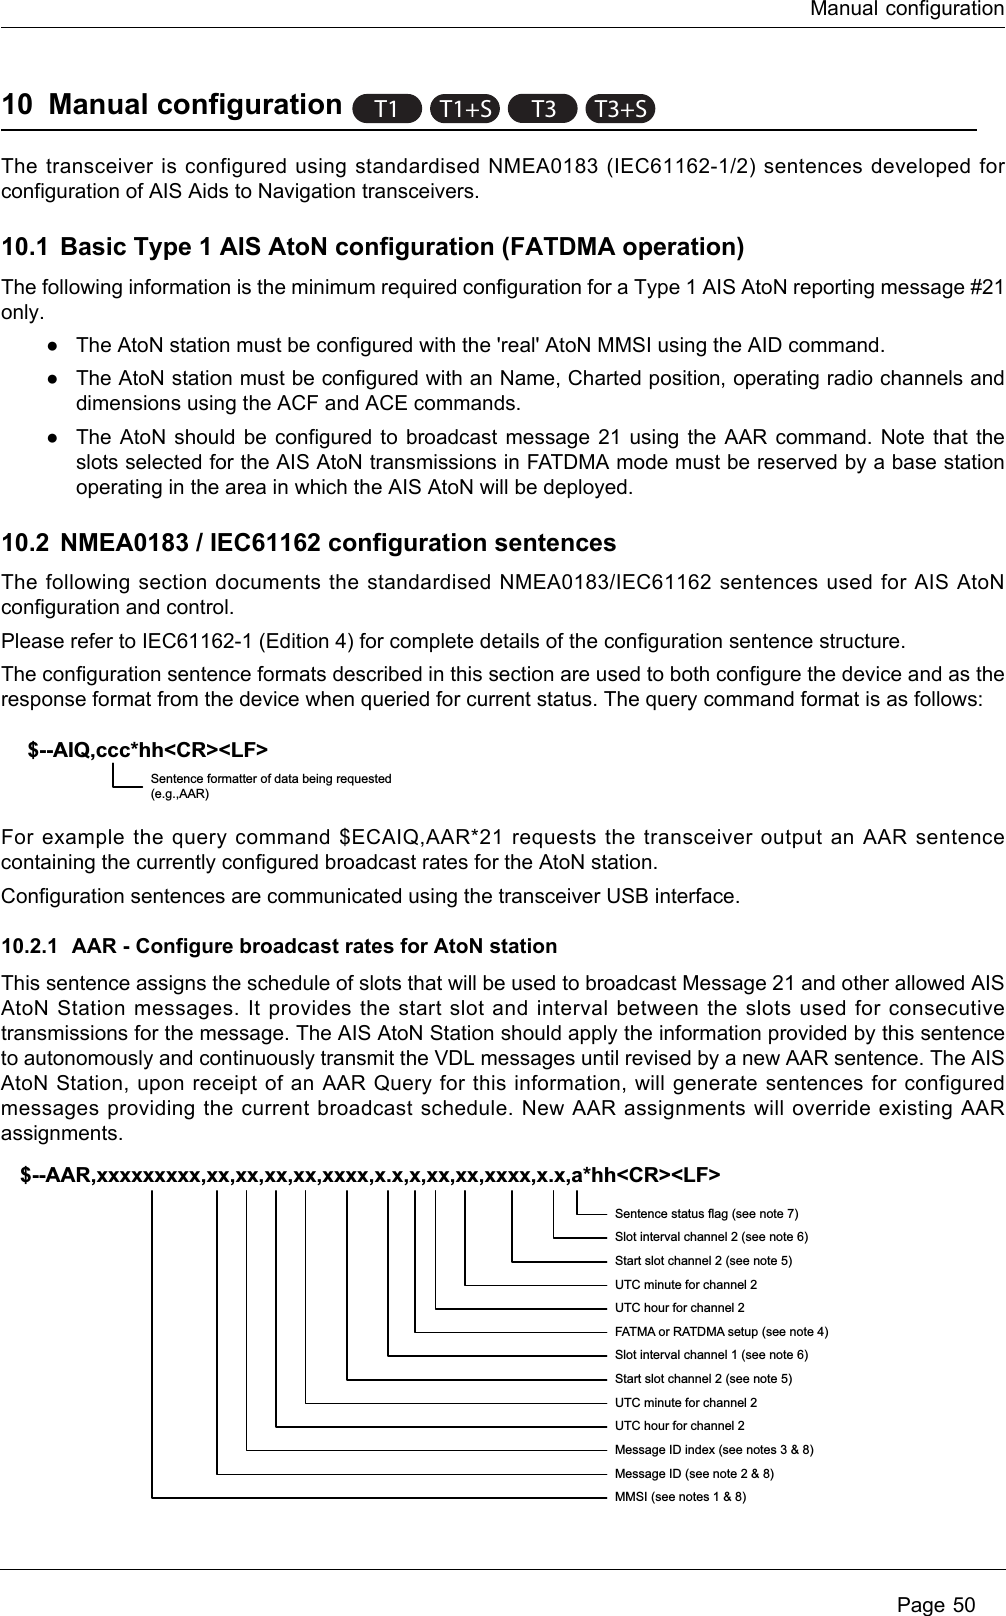 Manual configuration Page 5010 Manual configurationThe transceiver is configured using standardised NMEA0183 (IEC61162-1/2) sentences developed for configuration of AIS Aids to Navigation transceivers. 10.1 Basic Type 1 AIS AtoN configuration (FATDMA operation) The following information is the minimum required configuration for a Type 1 AIS AtoN reporting message #21 only.●The AtoN station must be configured with the &apos;real&apos; AtoN MMSI using the AID command.●The AtoN station must be configured with an Name, Charted position, operating radio channels and dimensions using the ACF and ACE commands.●The AtoN should be configured to broadcast message 21 using the AAR command. Note that the slots selected for the AIS AtoN transmissions in FATDMA mode must be reserved by a base station operating in the area in which the AIS AtoN will be deployed.10.2 NMEA0183 / IEC61162 configuration sentencesThe following section documents the standardised NMEA0183/IEC61162 sentences used for AIS AtoN configuration and control. Please refer to IEC61162-1 (Edition 4) for complete details of the configuration sentence structure.The configuration sentence formats described in this section are used to both configure the device and as the response format from the device when queried for current status. The query command format is as follows:For example the query command $ECAIQ,AAR*21 requests the transceiver output an AAR sentence containing the currently configured broadcast rates for the AtoN station.Configuration sentences are communicated using the transceiver USB interface.10.2.1 AAR - Configure broadcast rates for AtoN stationThis sentence assigns the schedule of slots that will be used to broadcast Message 21 and other allowed AIS AtoN Station messages. It provides the start slot and interval between the slots used for consecutive transmissions for the message. The AIS AtoN Station should apply the information provided by this sentence to autonomously and continuously transmit the VDL messages until revised by a new AAR sentence. The AIS AtoN Station, upon receipt of an AAR Query for this information, will generate sentences for configured messages providing the current broadcast schedule. New AAR assignments will override existing AAR assignments.T1 T1+ST3T3+S$--AIQ,ccc*hh&lt;CR&gt;&lt;LF&gt;Sentence formatter of data being requested (e.g.,AAR)$--AAR,xxxxxxxxx,xx,xx,xx,xx,xxxx,x.x,x,xx,xx,xxxx,x.x,a*hh&lt;CR&gt;&lt;LF&gt;Sentence status flag (see note 7)Slot interval channel 2 (see note 6)Start slot channel 2 (see note 5)UTC minute for channel 2UTC hour for channel 2FATMA or RATDMA setup (see note 4)Slot interval channel 1 (see note 6)Start slot channel 2 (see note 5)UTC minute for channel 2UTC hour for channel 2Message ID index (see notes 3 &amp; 8)Message ID (see note 2 &amp; 8)MMSI (see notes 1 &amp; 8)